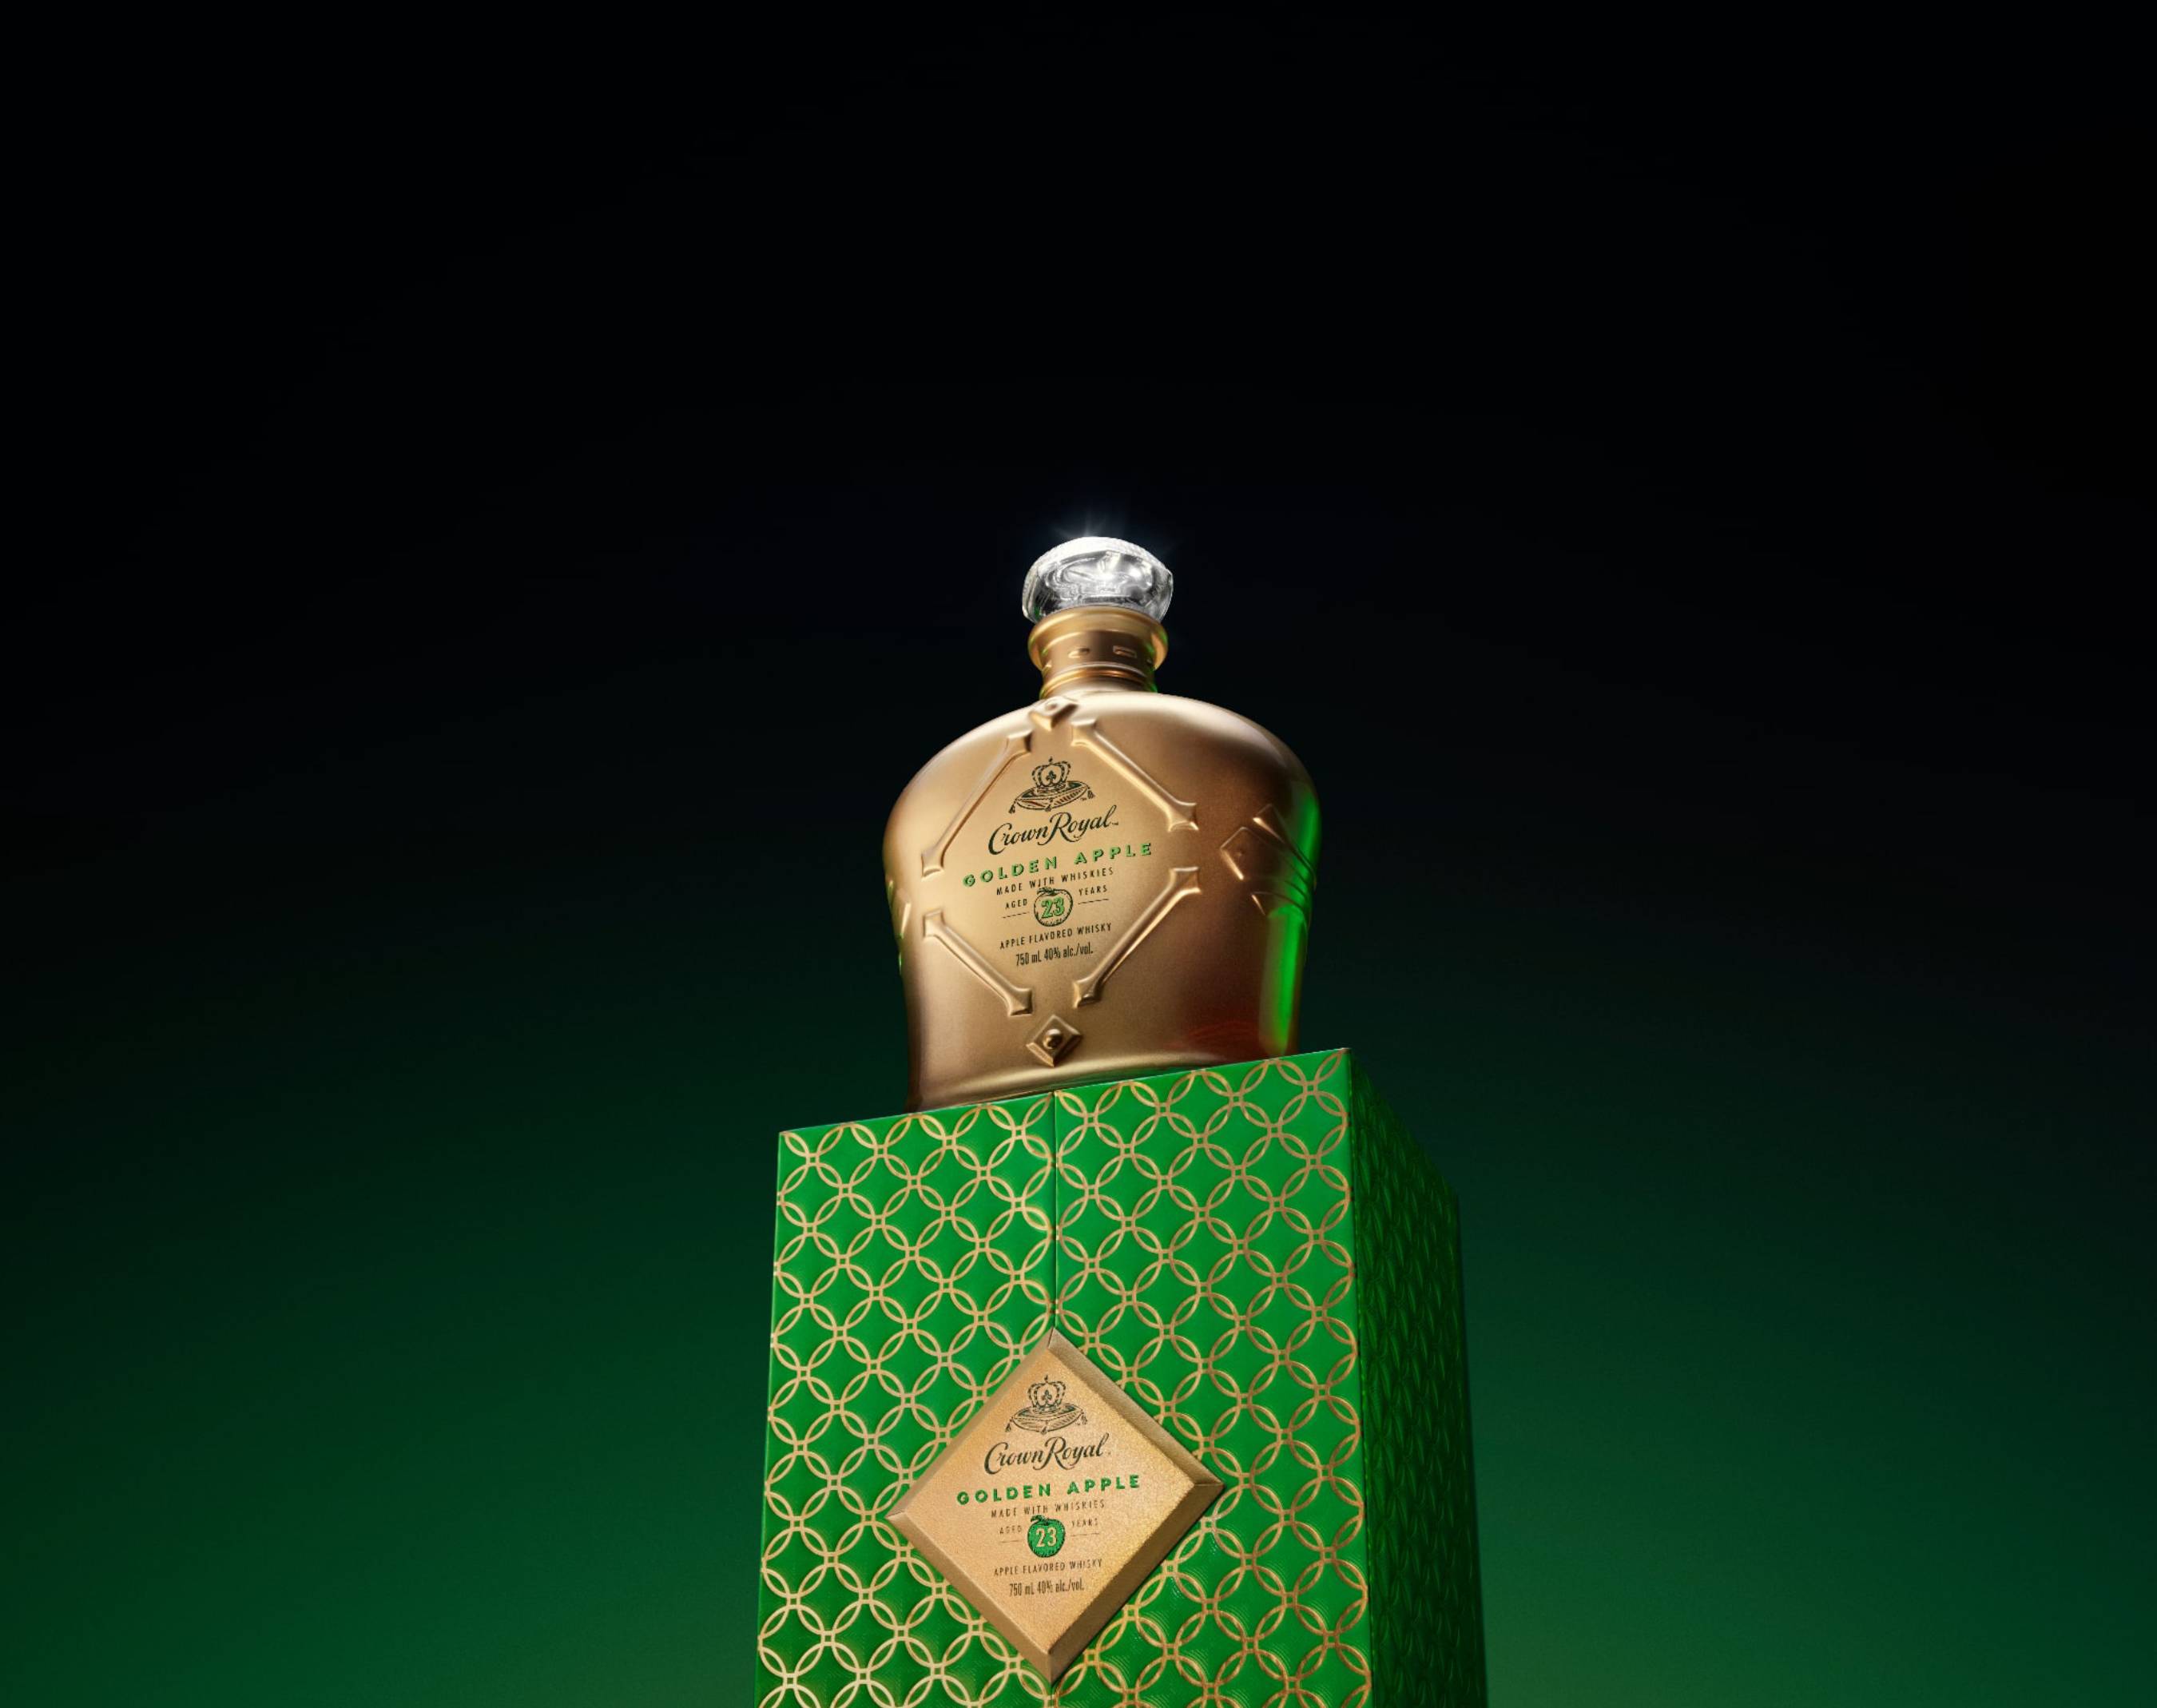 Crown Royal Golden Apple Aged 23 Years will hit shelves on June 1st and is paired with a bespoke golden bottle in an iconic suede-finished Crown Royal bag and collector’s box.